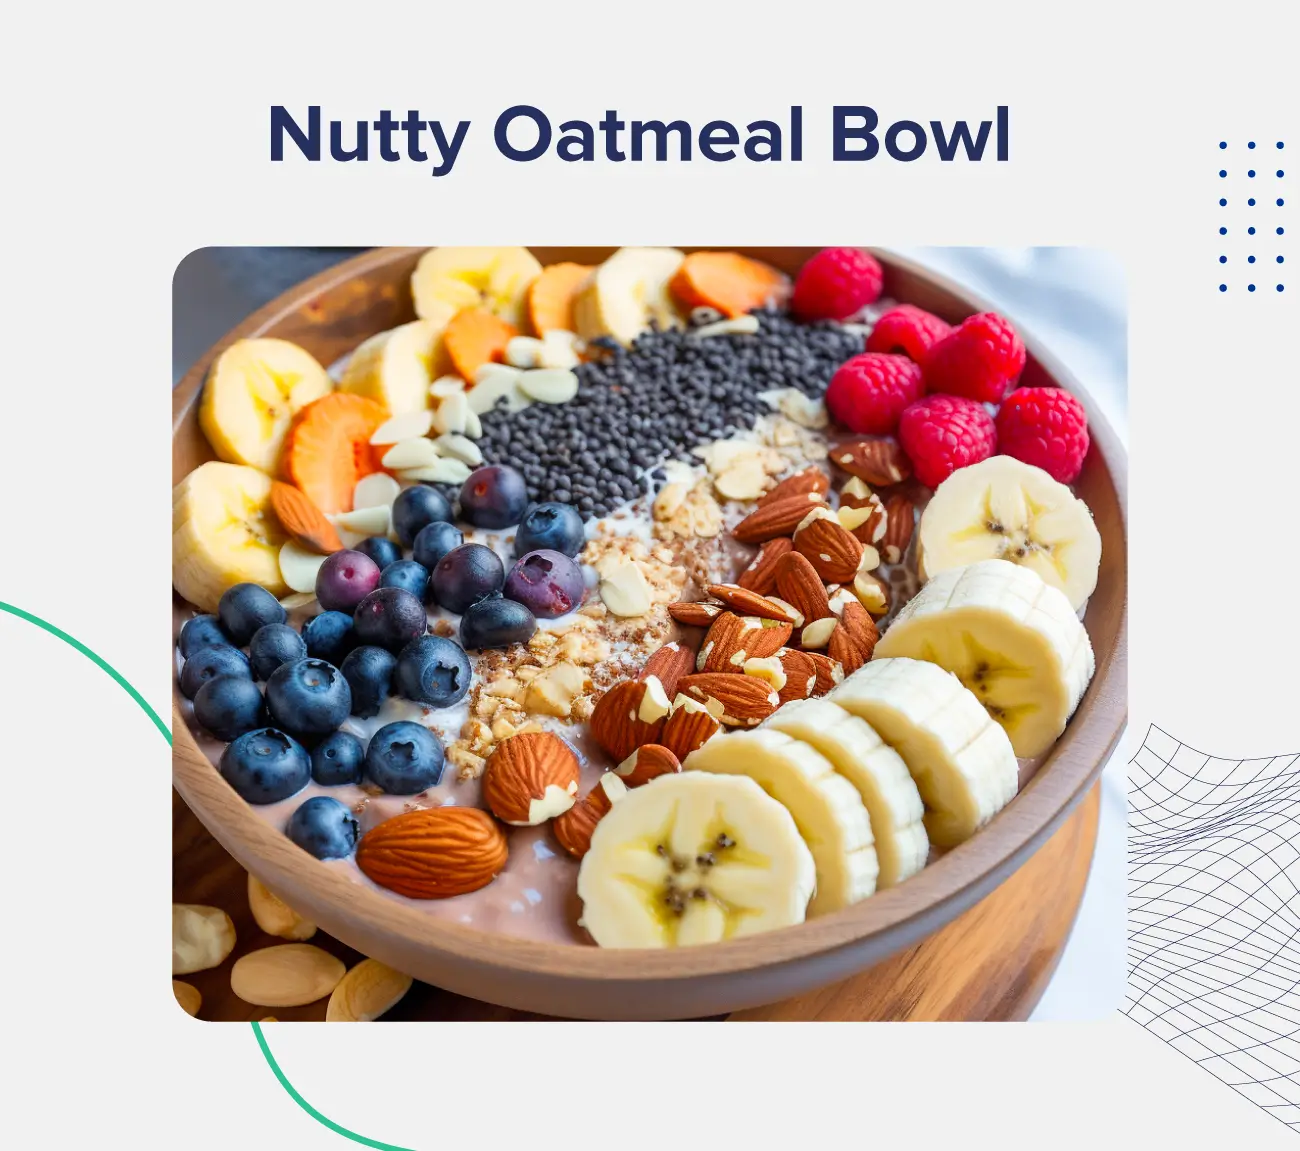 A graphic entitled "Nutty Oatmeal Bowl," showing a bowl of oatmeal adorned with bananas, almonds, blueberries, raspberries, and more.